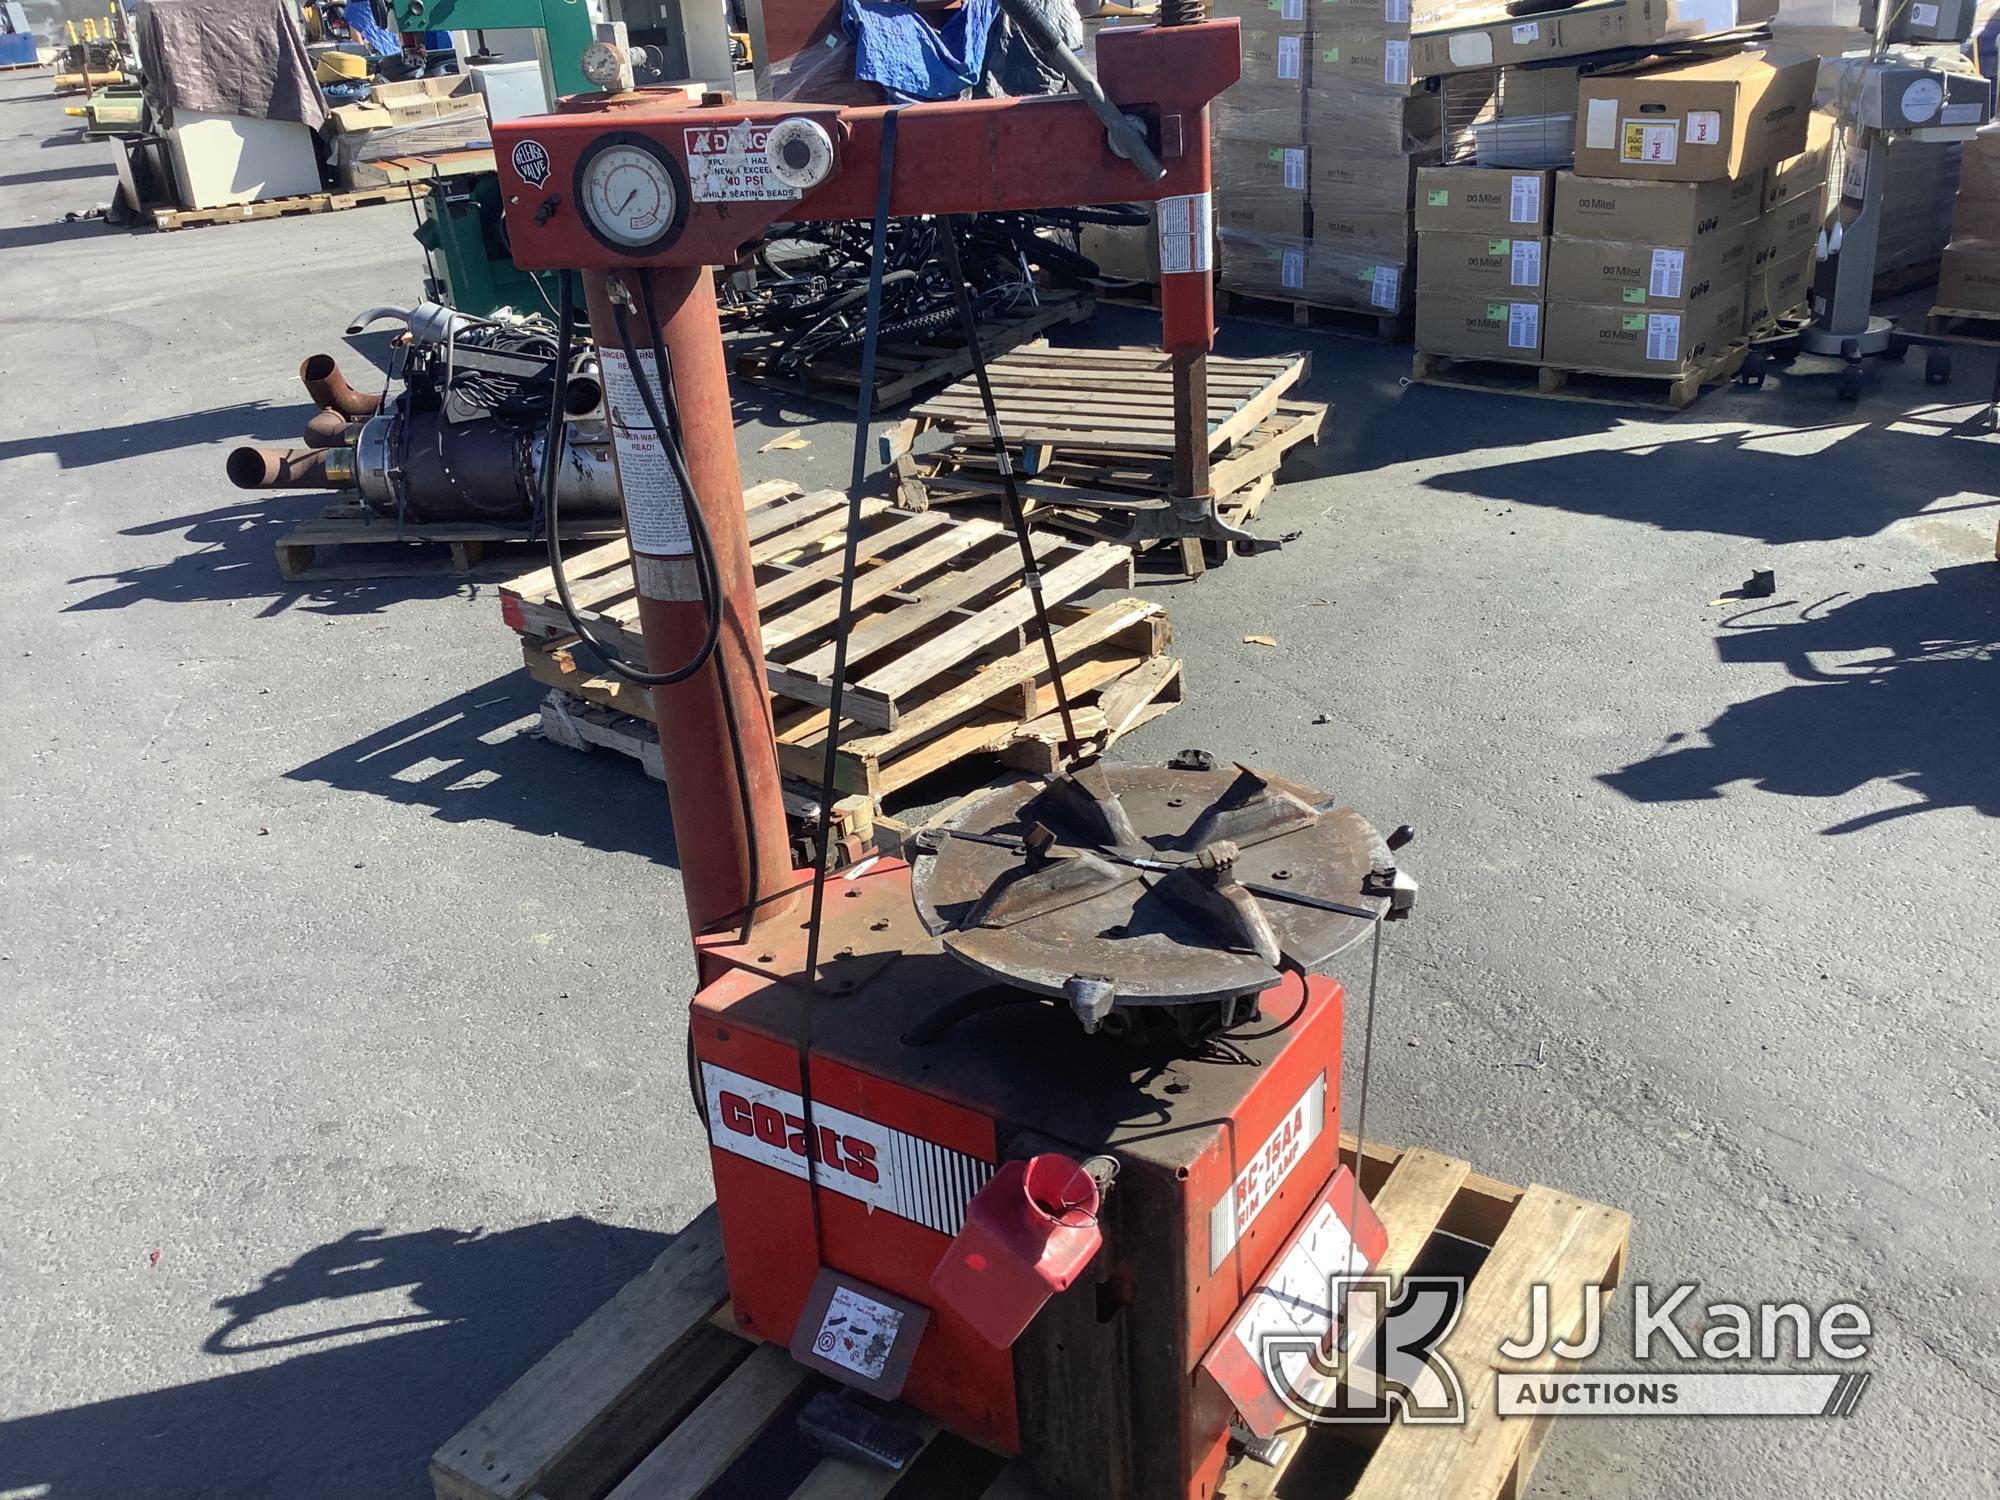 (Jurupa Valley, CA) 1 Coopertires Rim Clamp Machine (Used ) NOTE: This unit is being sold AS IS/WHER